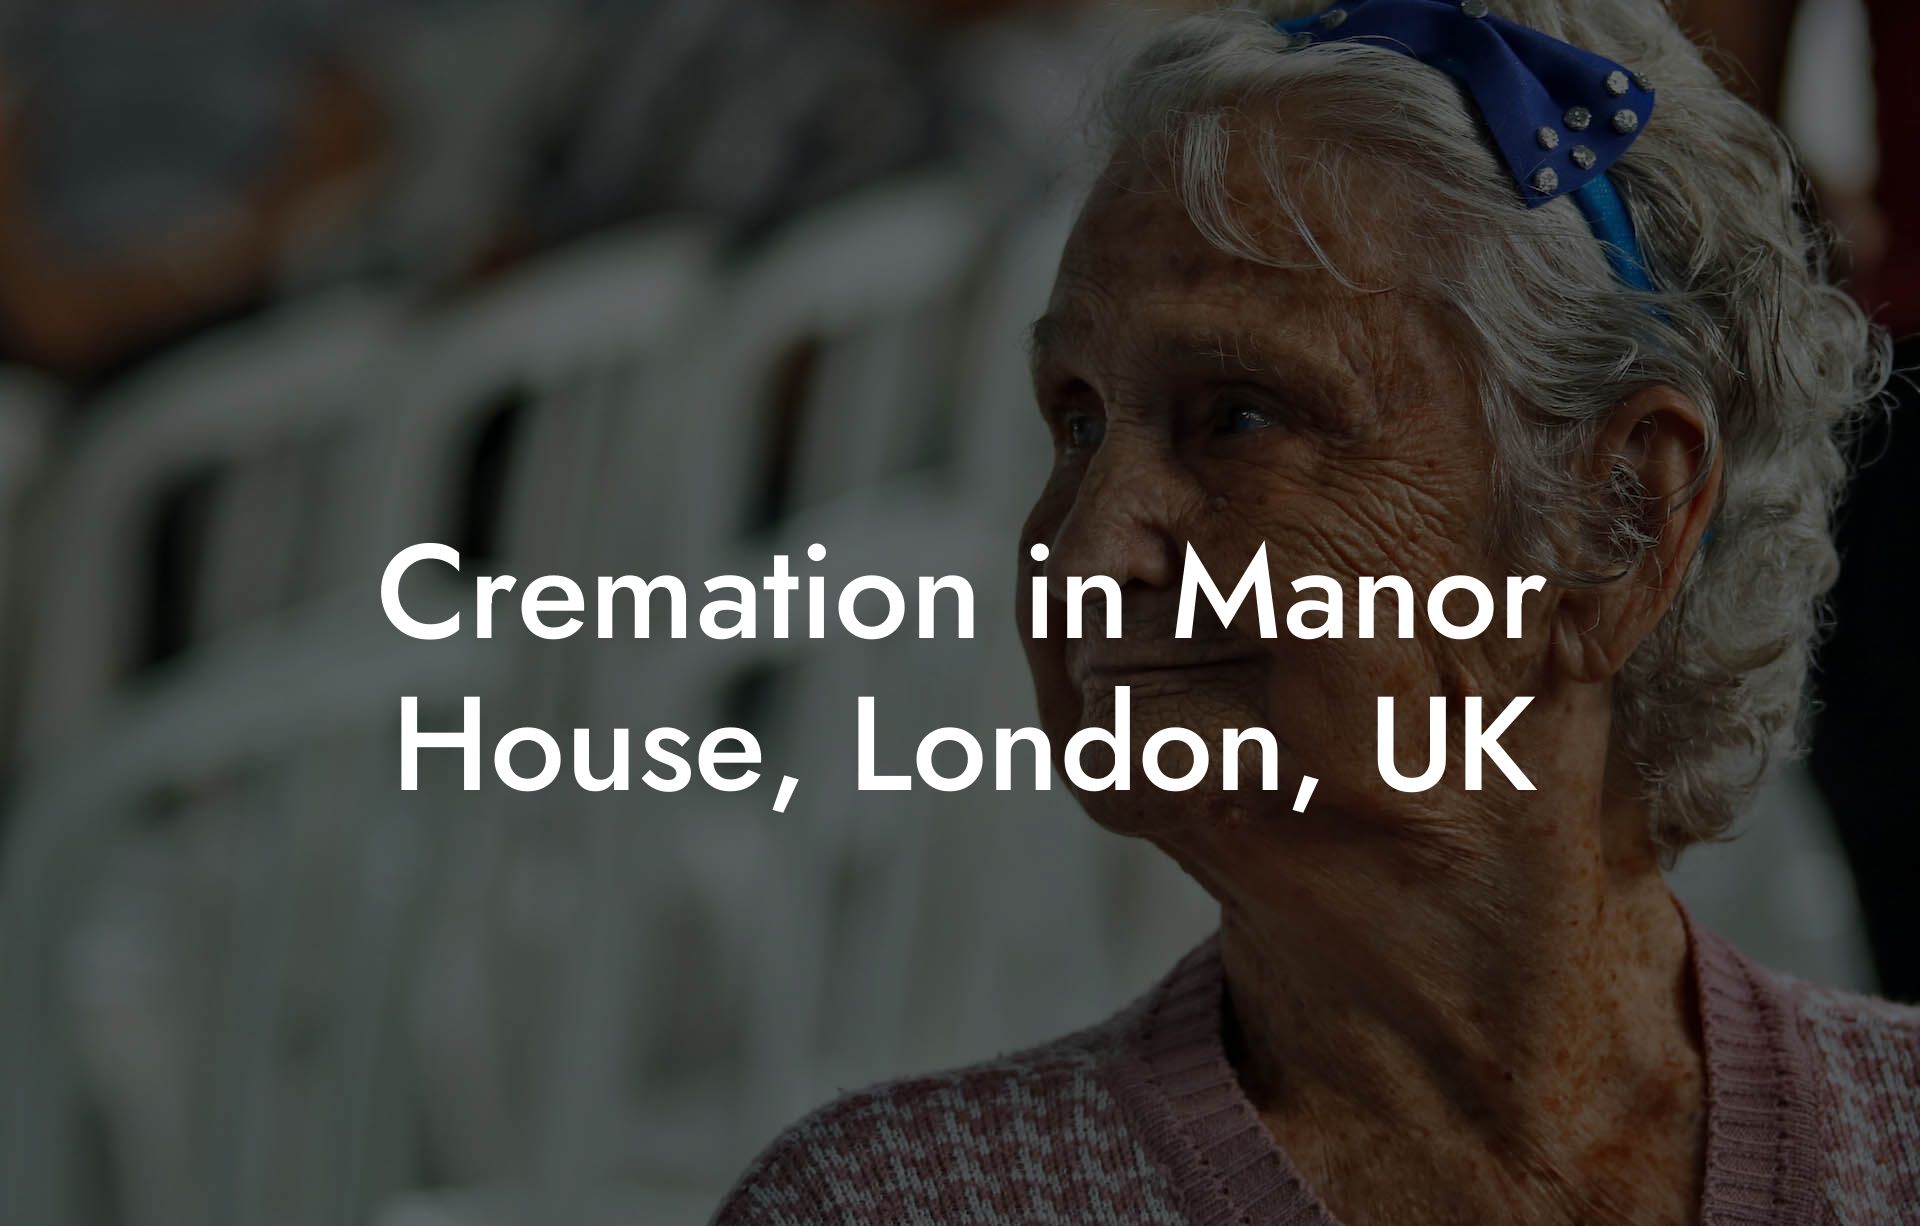 Cremation in Manor House, London, UK